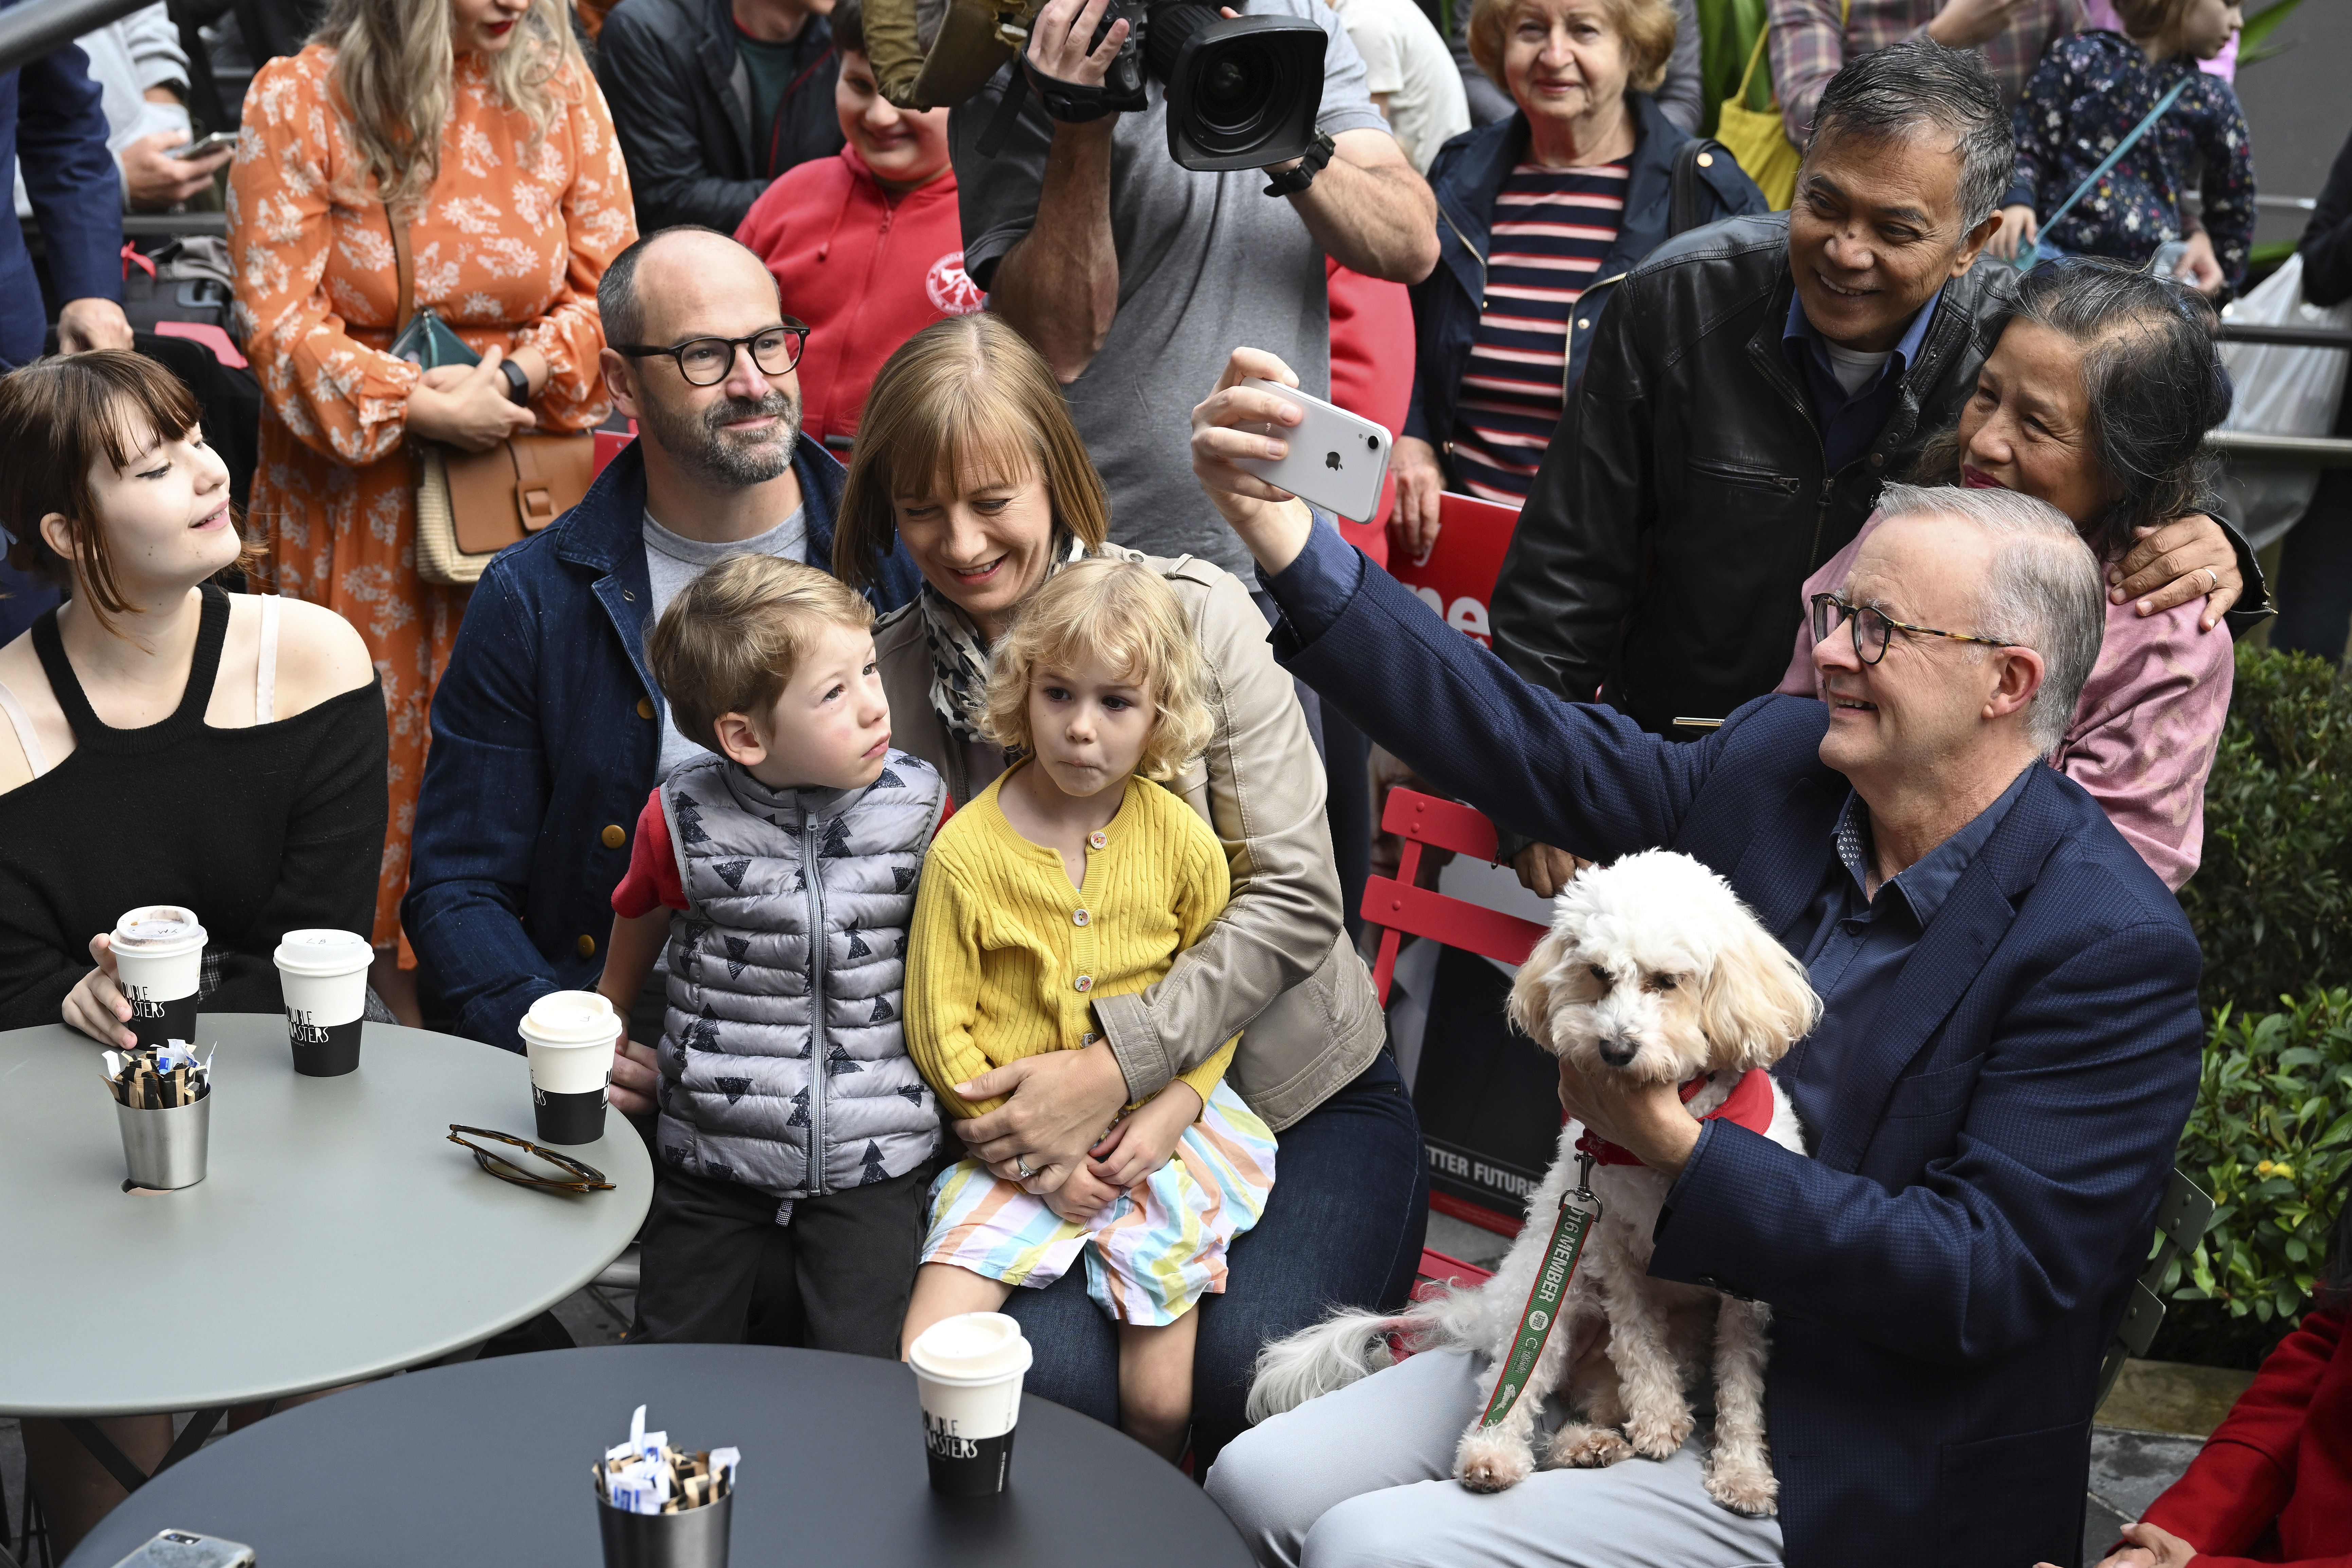 Mr Albanese with his dog Toto with community members in Sydney